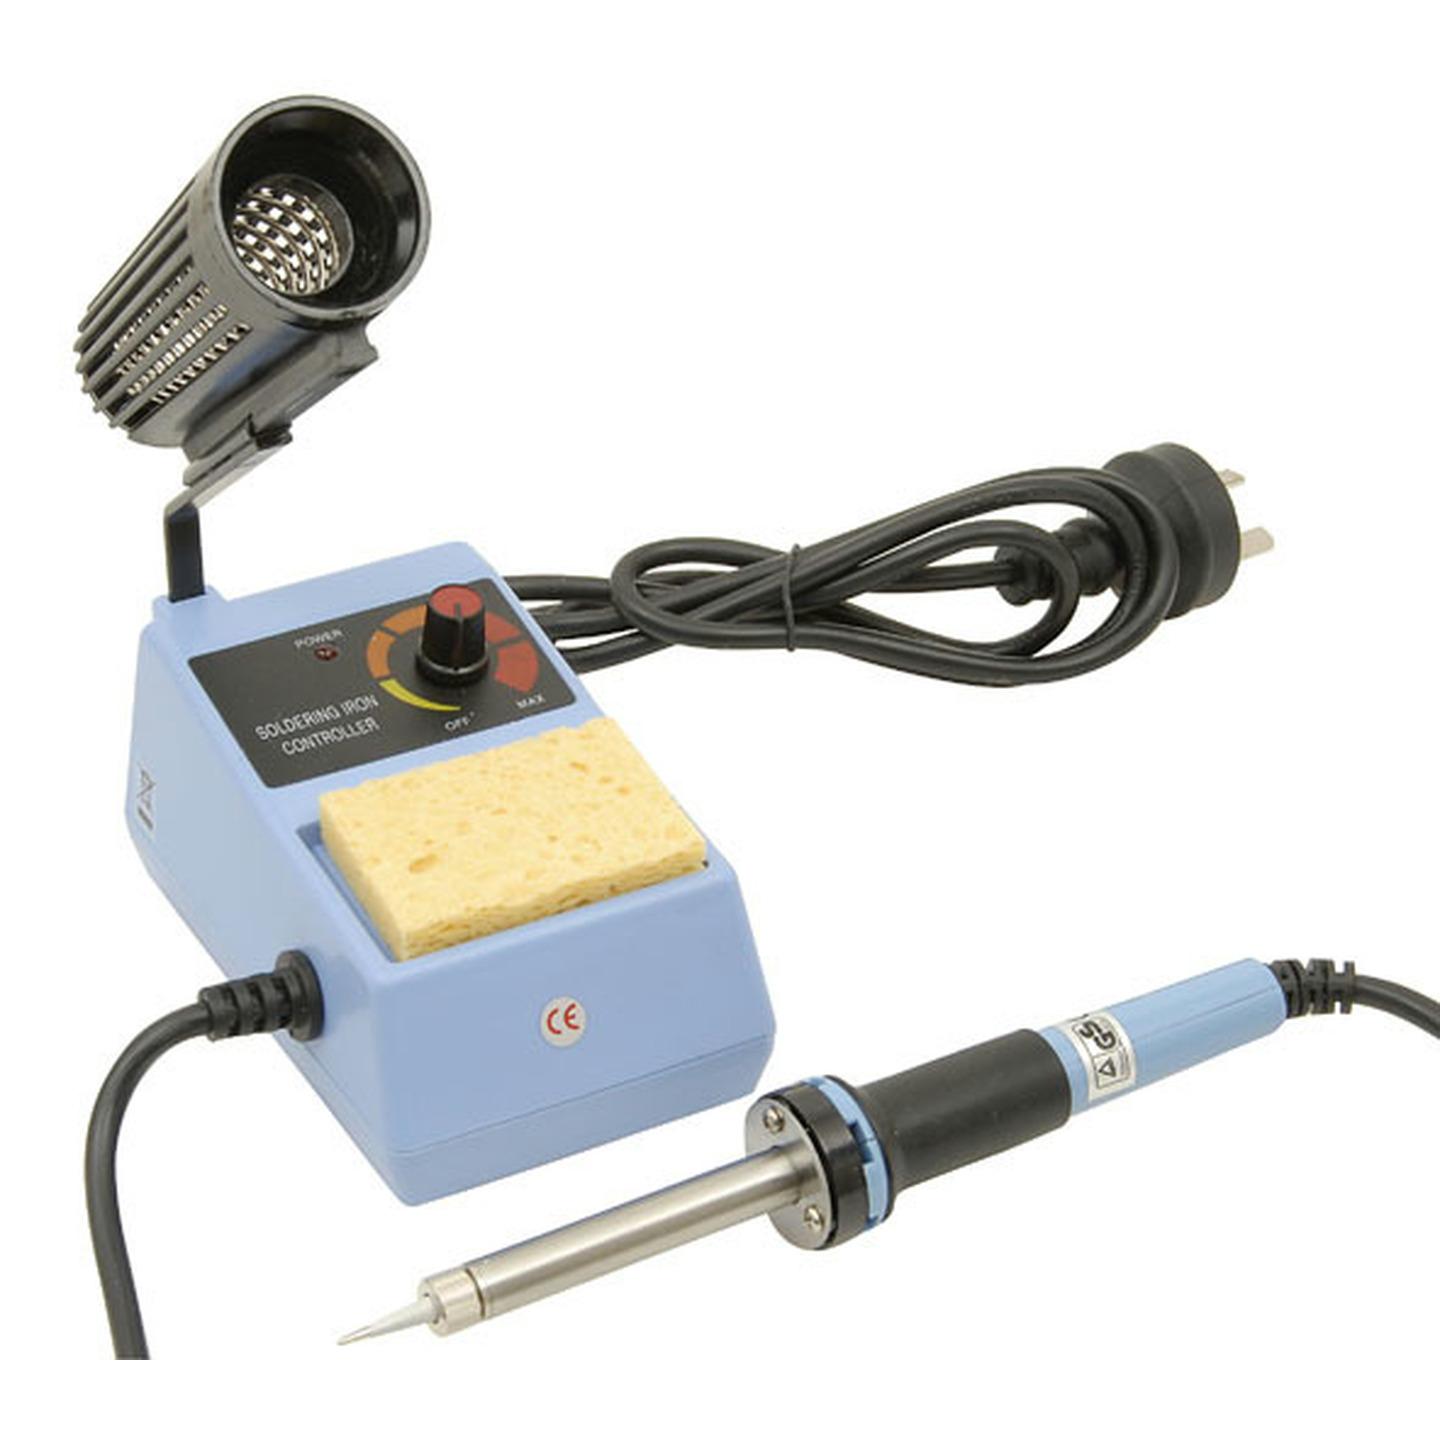 Duratech 48W Temperature Controlled Soldering Station